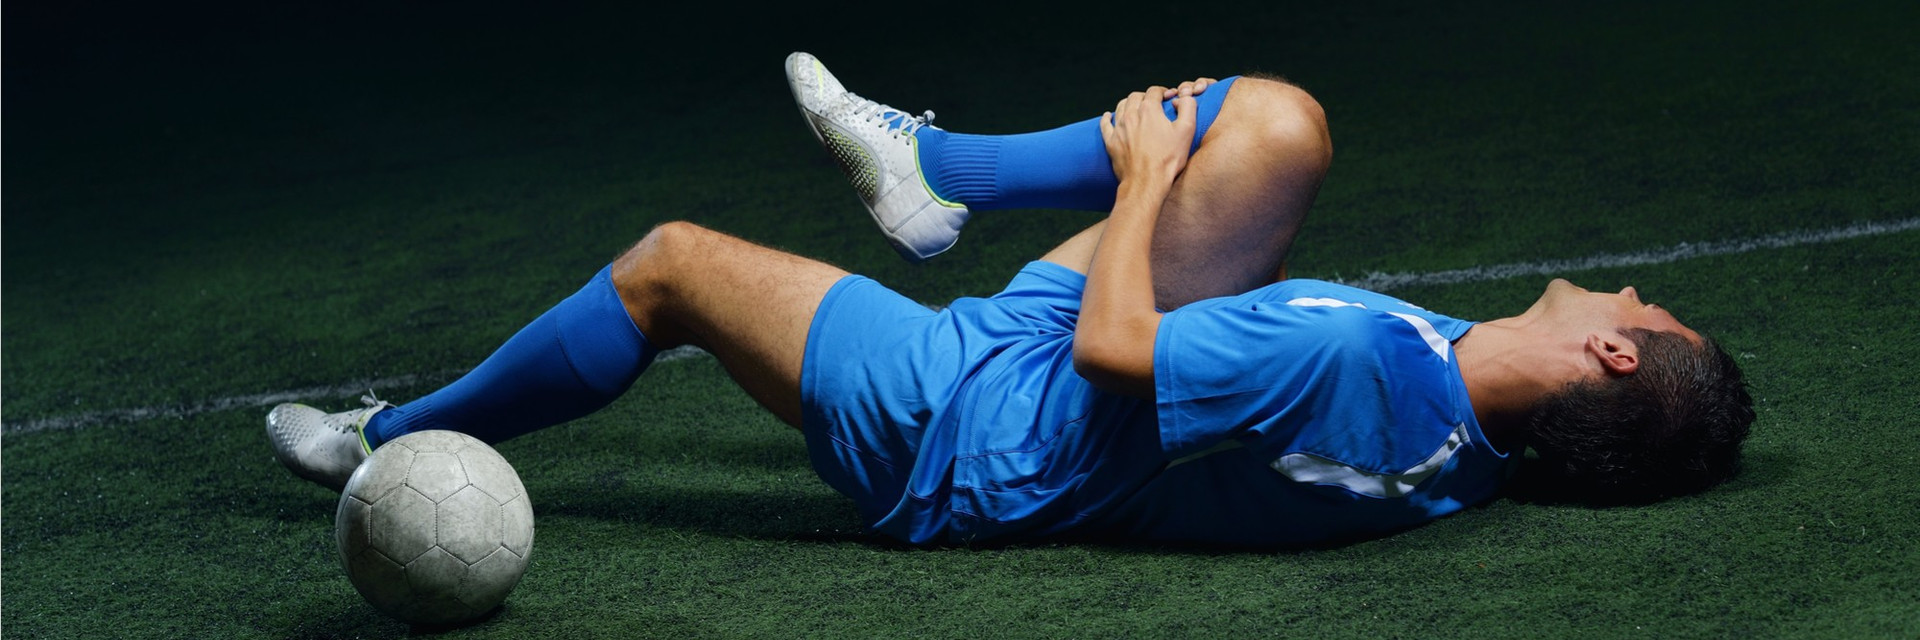 The 5 Most Common Soccer Injuries and the 3 P’s of Treatment Rothman